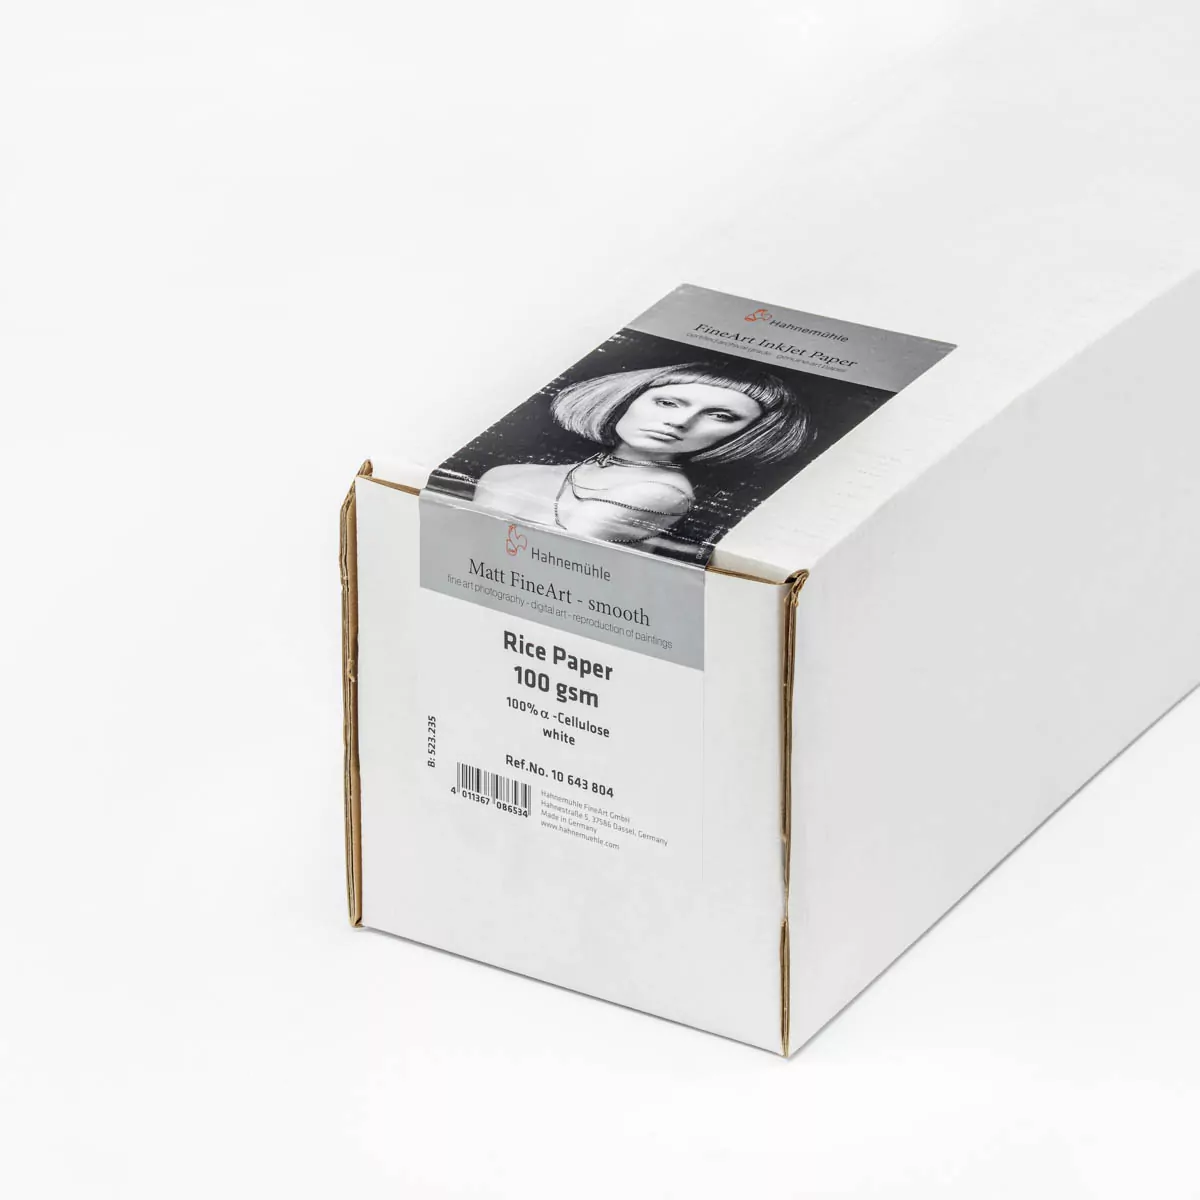 Hahnemuhle Rice Paper 100gsm 44”(111cm)x30m roll